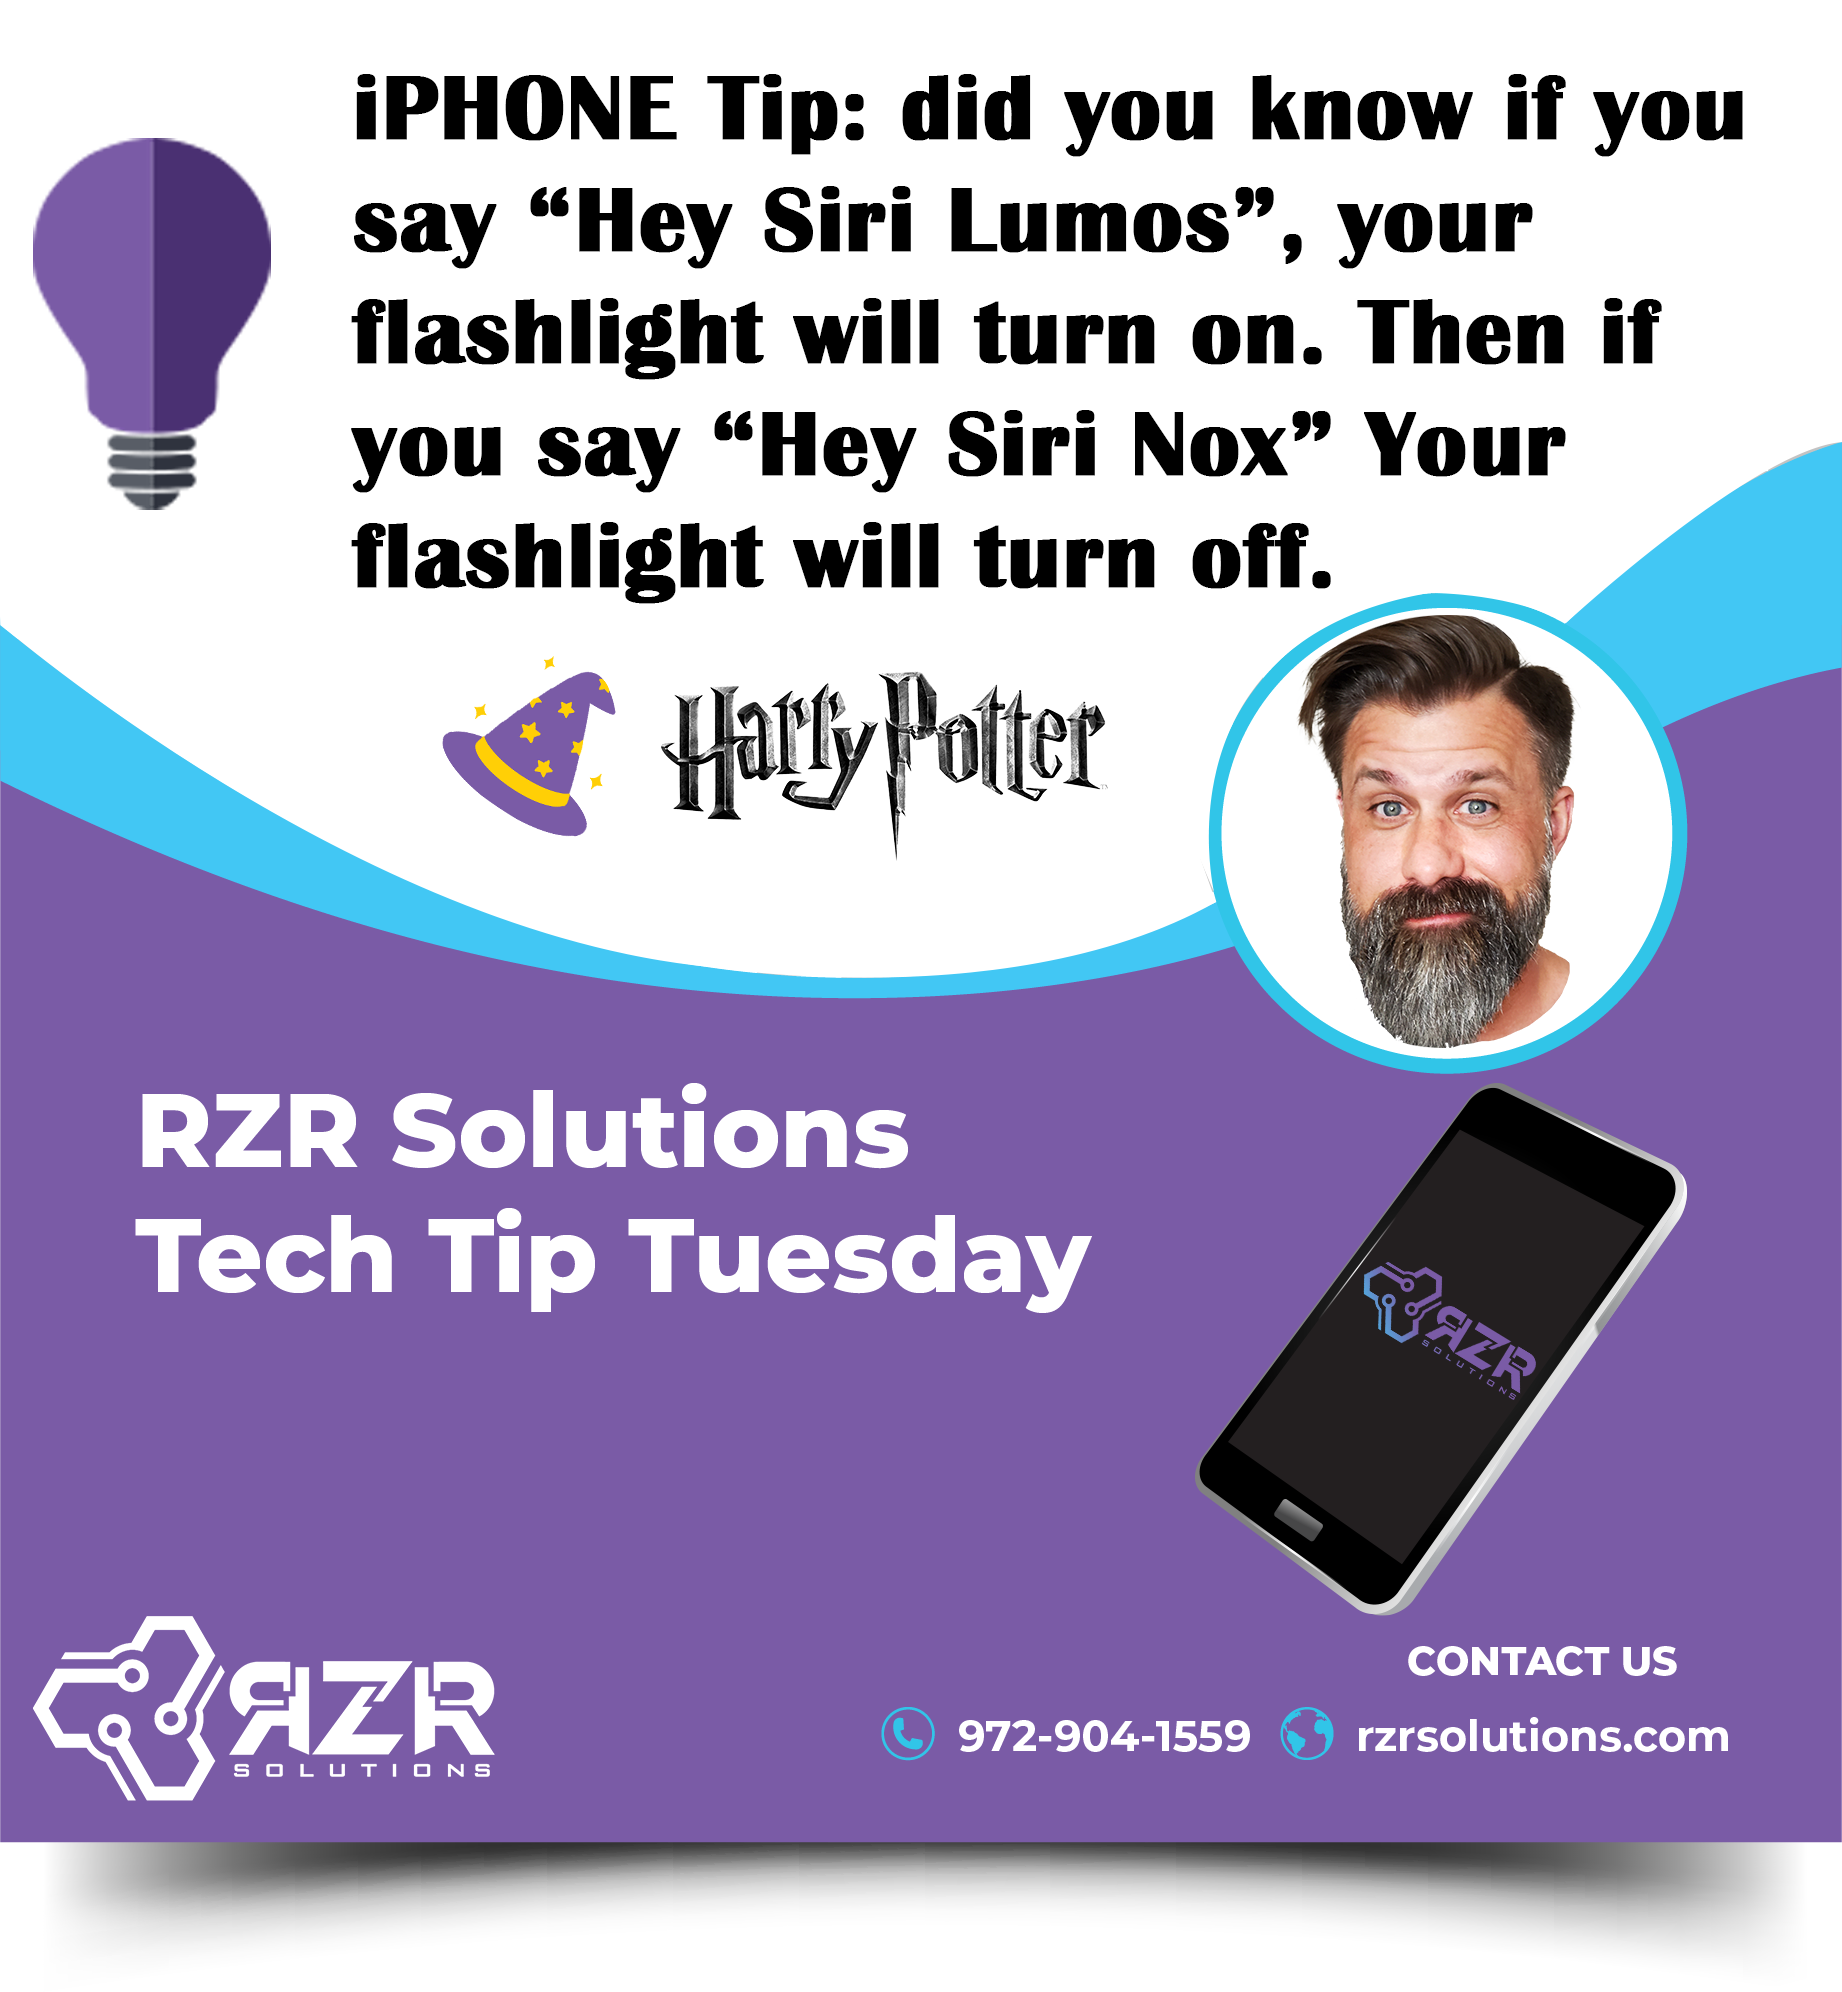 A graphic presenting a tech tip for iPhone users, instructing them to use Siri commands 'Lumos' to turn on the flashlight and 'Nox' to turn it off, brought to you by RZR Solutions, your trusted MSP in North Texas.